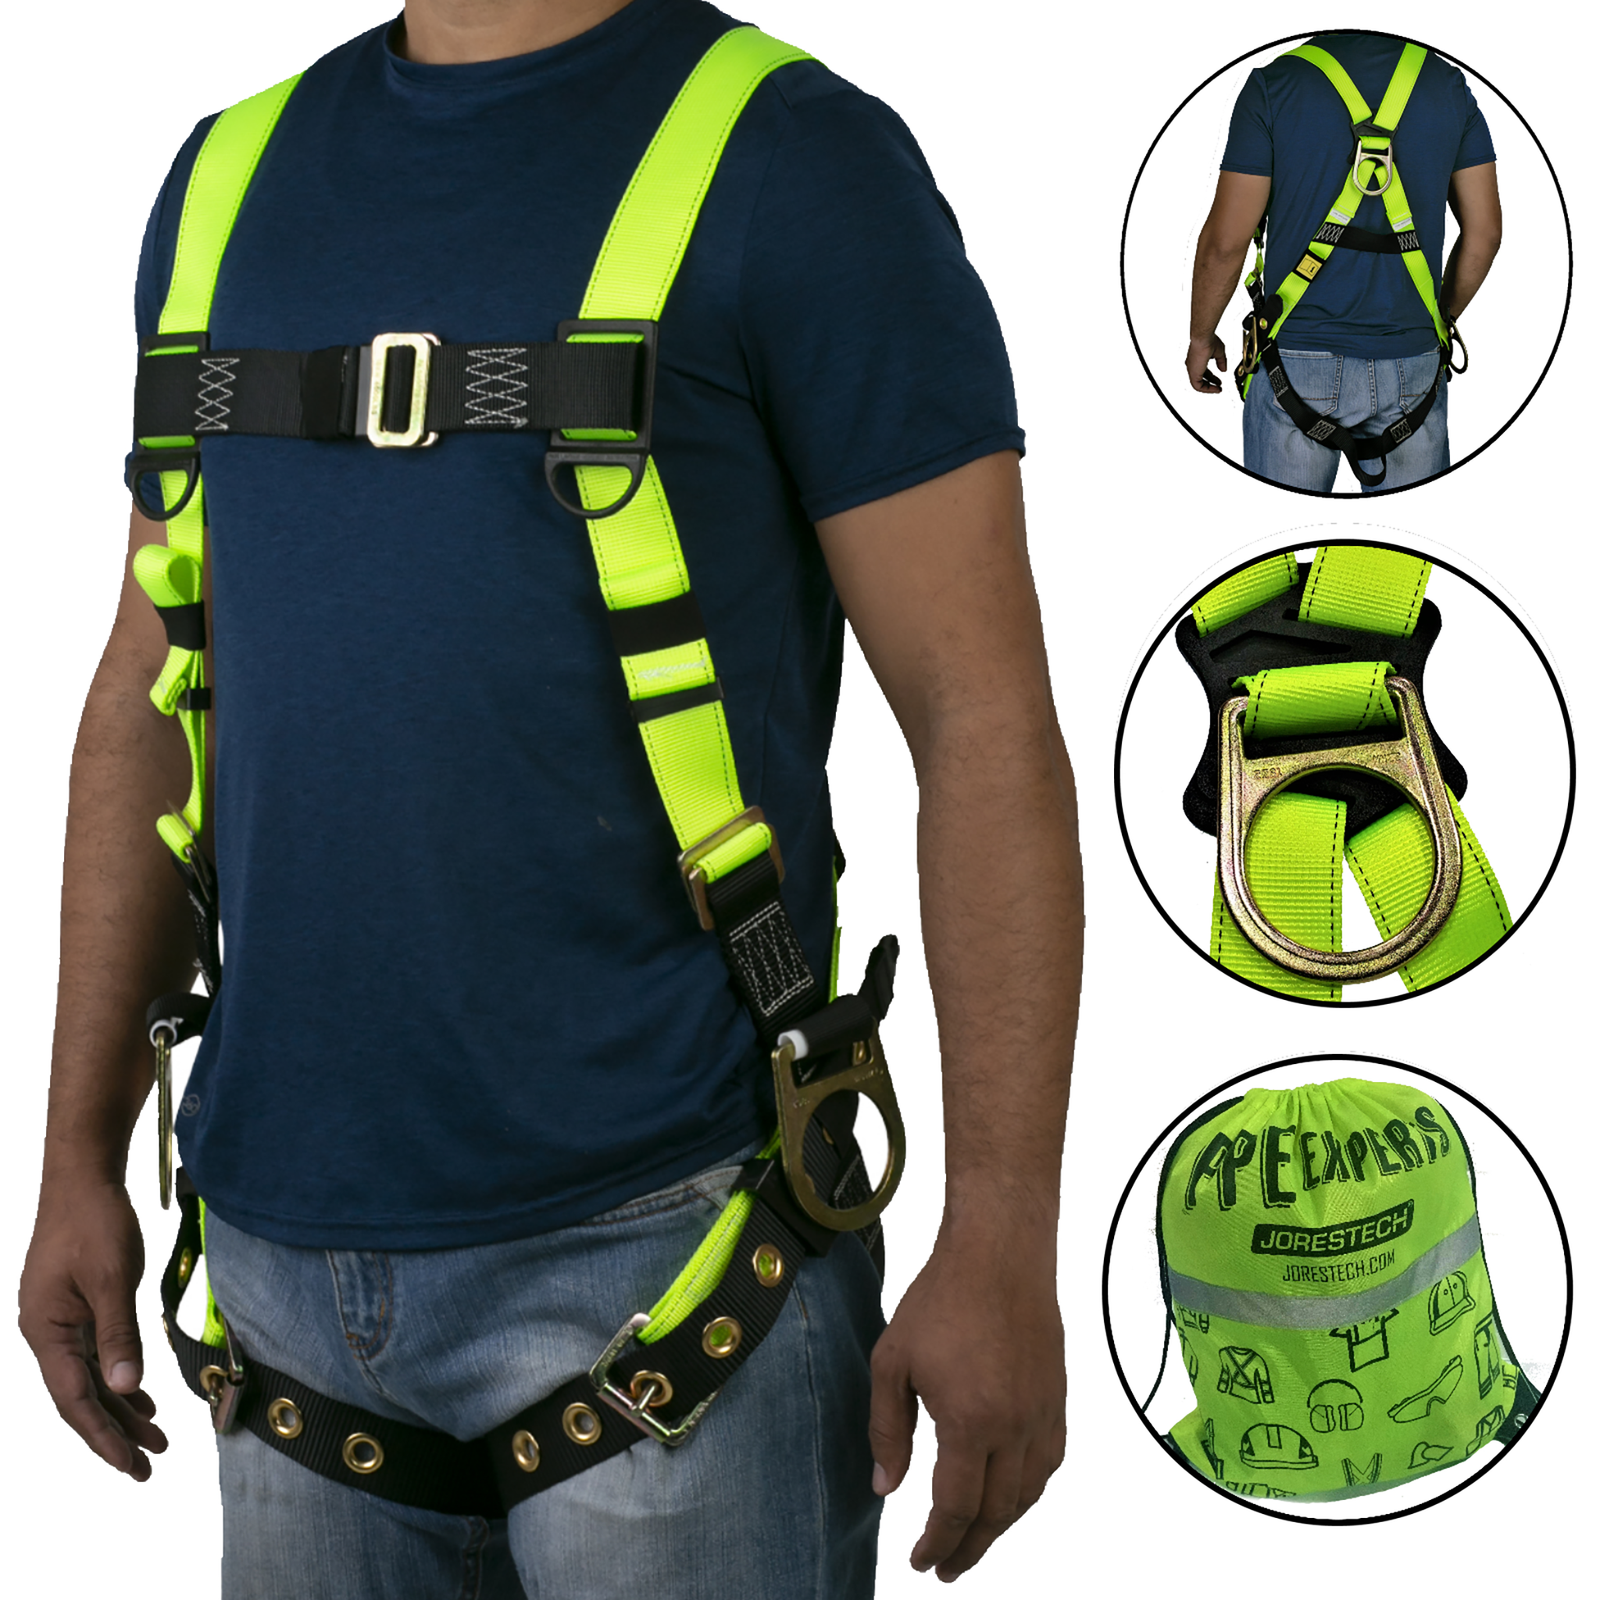 Torso of a person wearing the 3D fall protection safety body JORESTECH harness with grommets. Also features the back view of the same person wearing the harness with 3 D rings,  a close up of each D ring and the hi-vis lime carry bag that is included to carry the harness